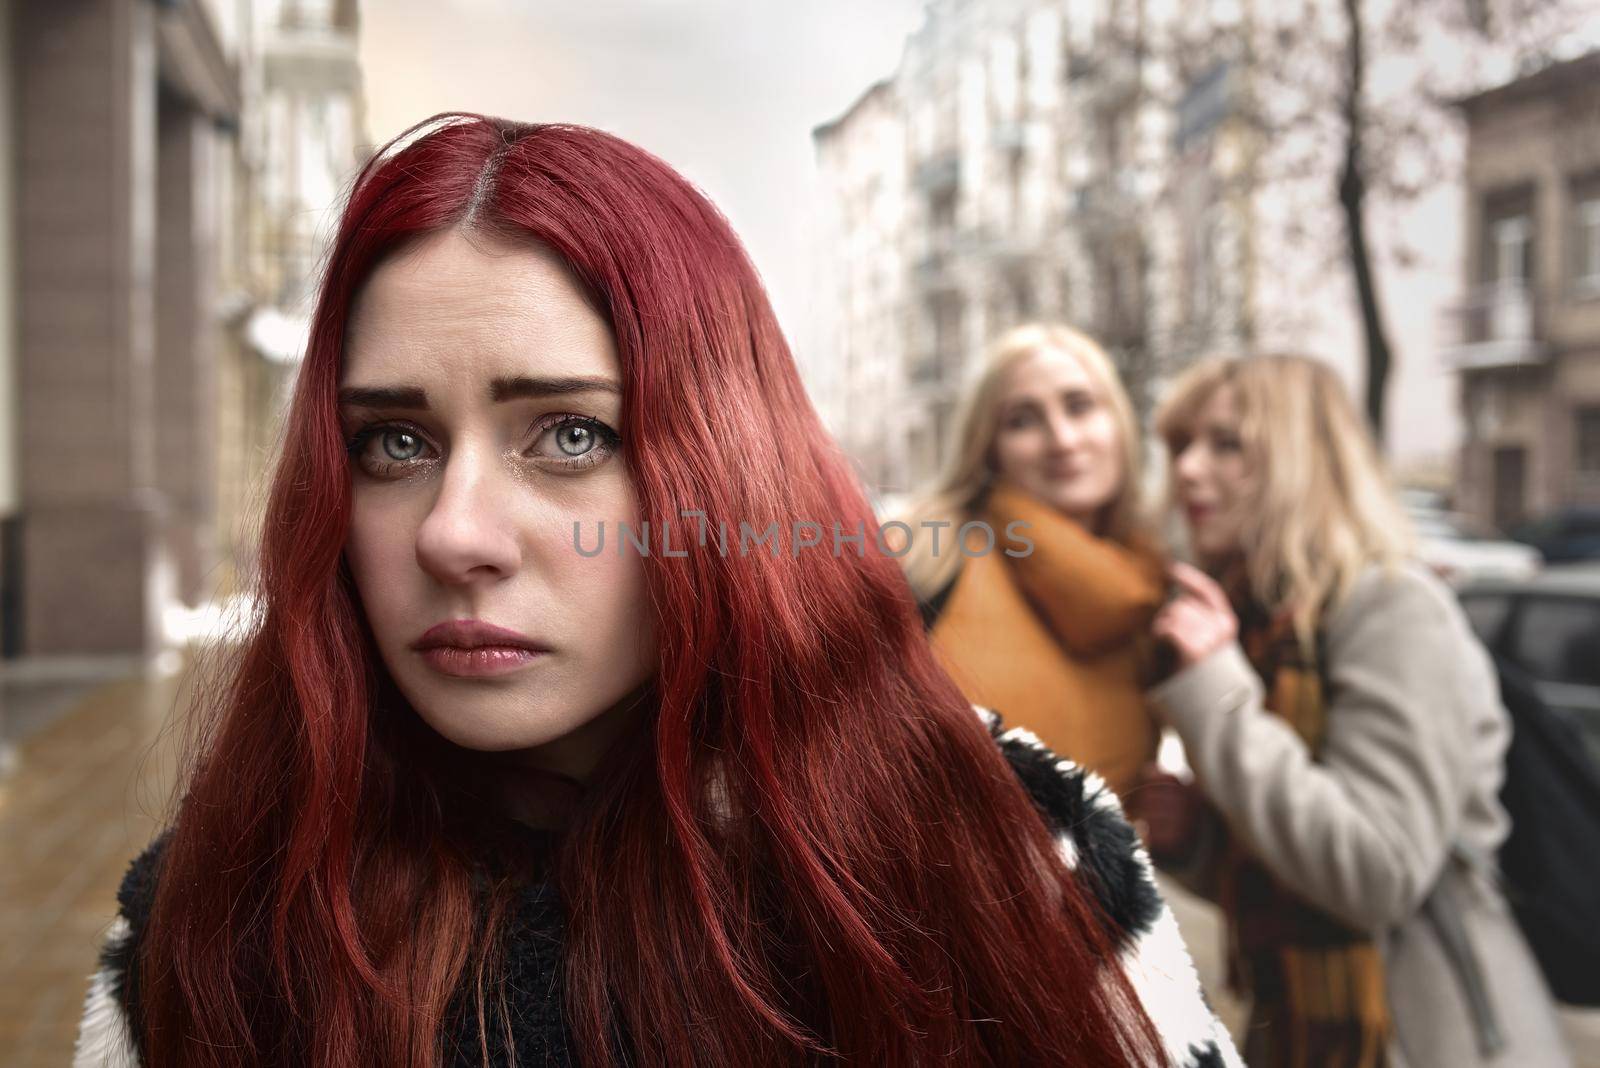 a young depressed student girl with red hair who is bullied by her teenage peers, disturbed by feelings of despair and suffering from oppression. social problems